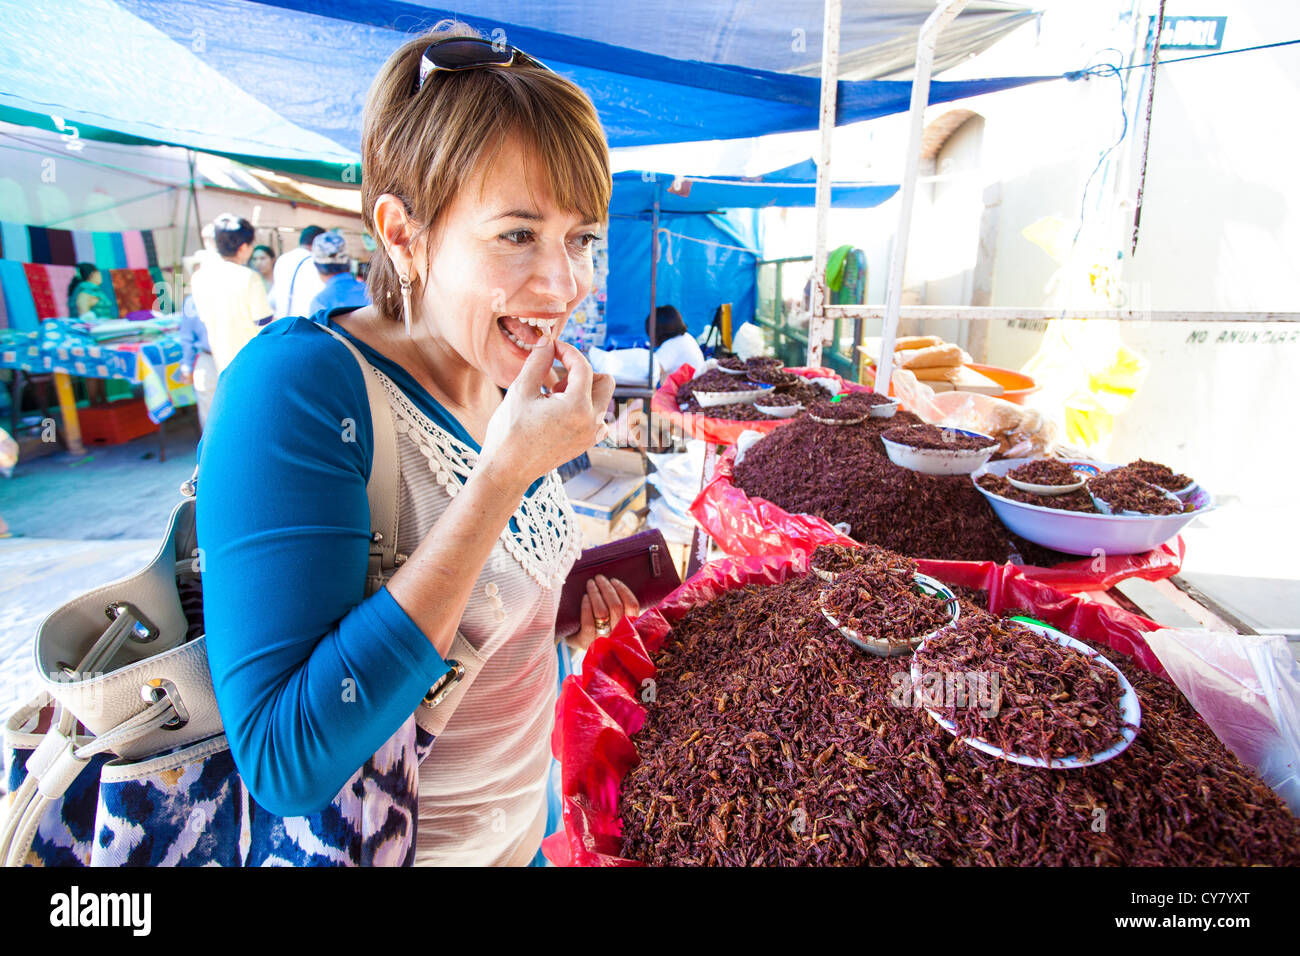 Woman tourist tries a dried grasshopper in the Tlacolula, Oaxaca market in Mexico. Stock Photo